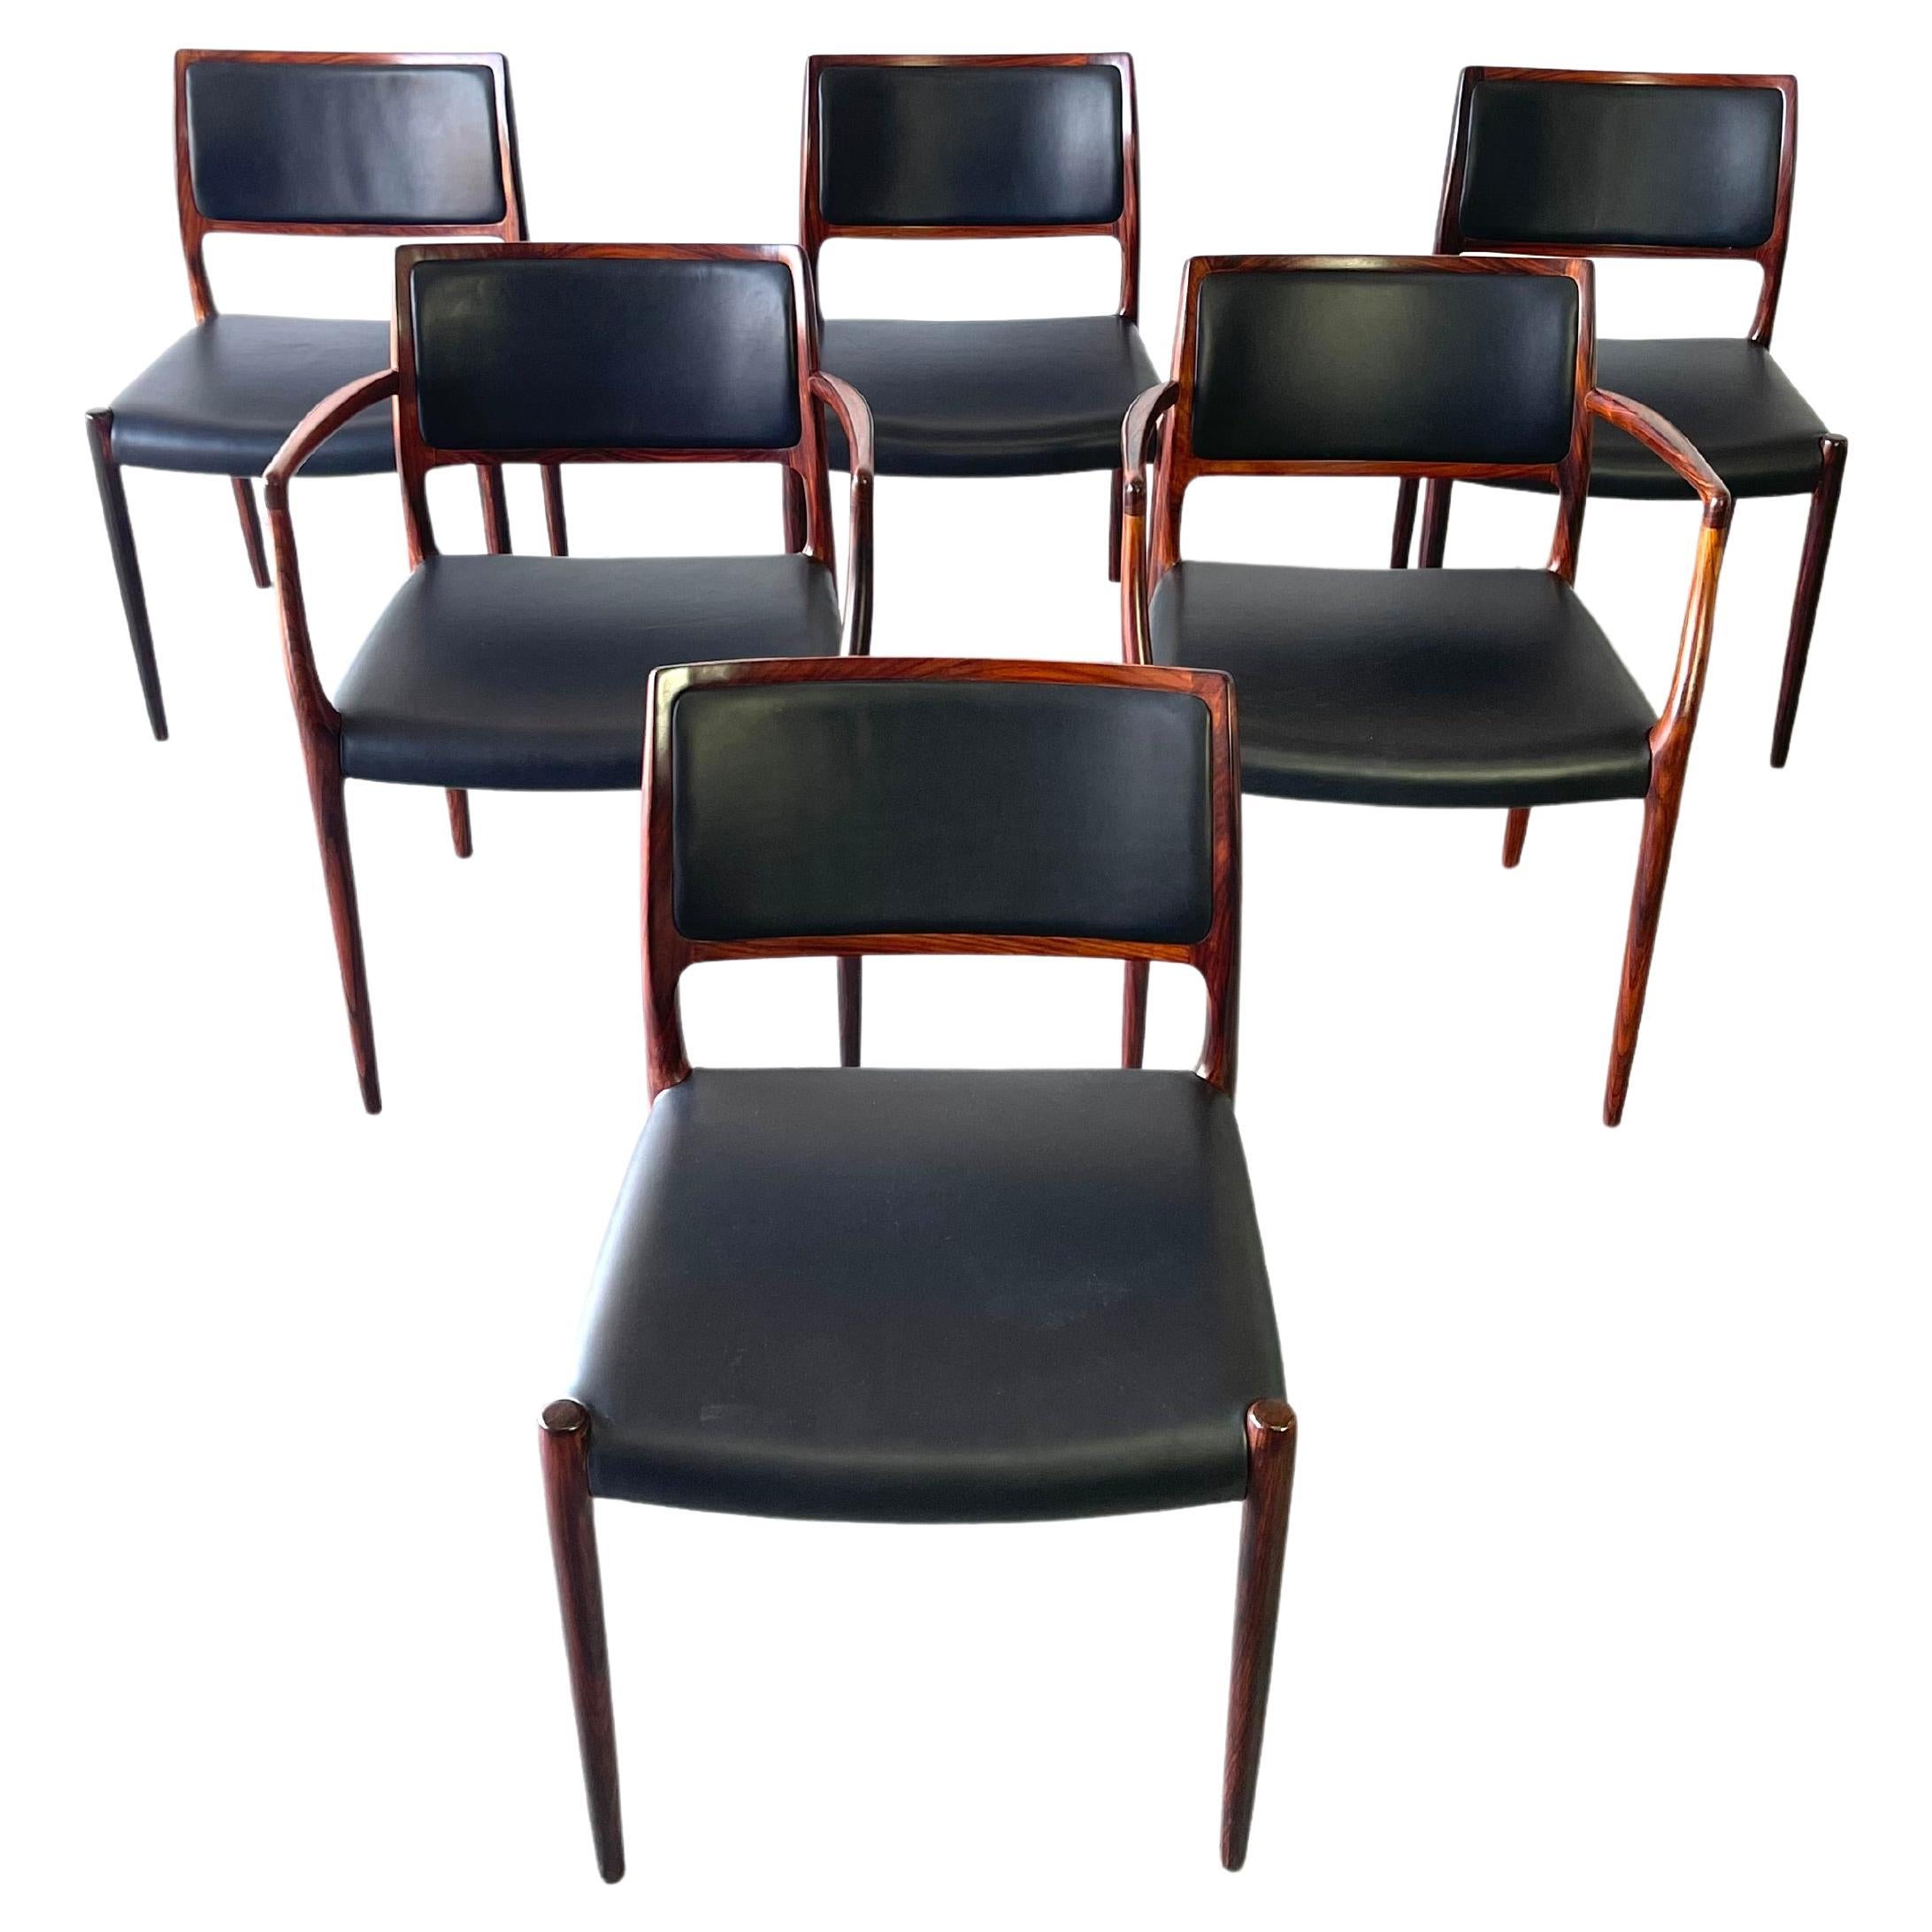 Set of six dining chairs in rosewood by Niels Otto Møller for J.L. Møllers Møbelfabrik. Two Model 65 captains/arm chairs and four Model 80. Side chairs. All chairs display Niels Otto Møllers characteristic organic shapes and the high standard of